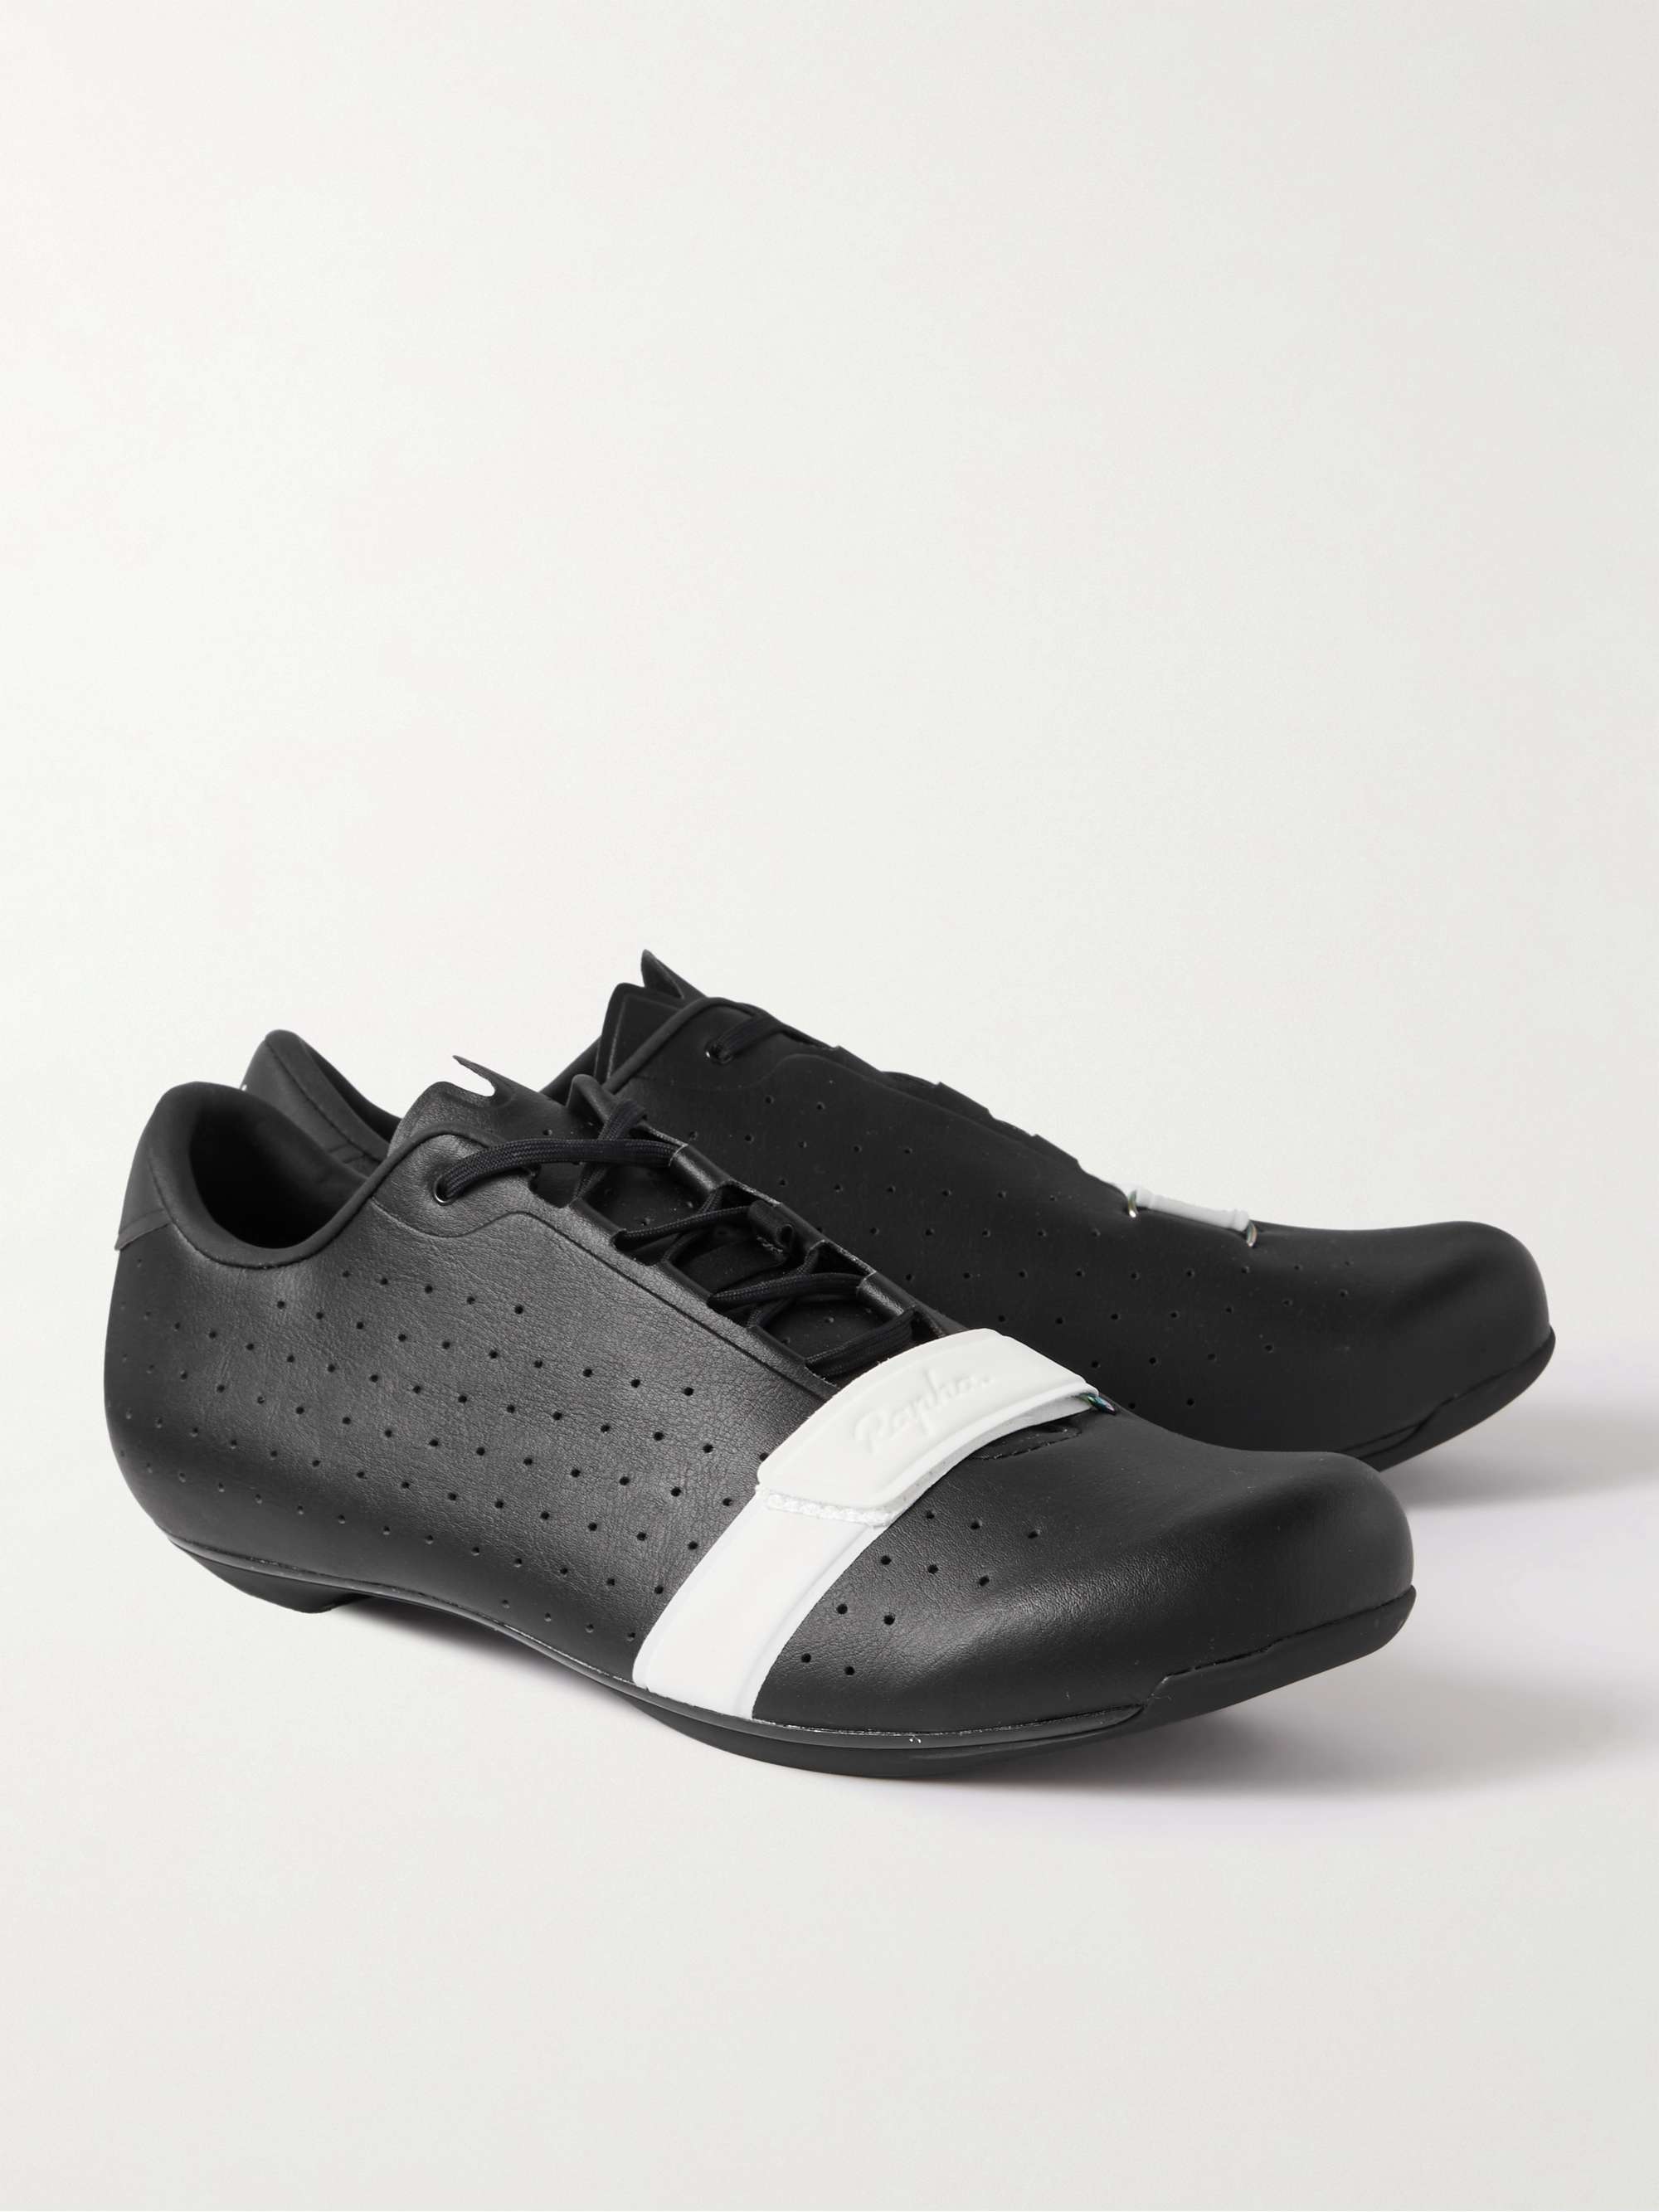 RAPHA Classic Cycling Shoes | MR PORTER